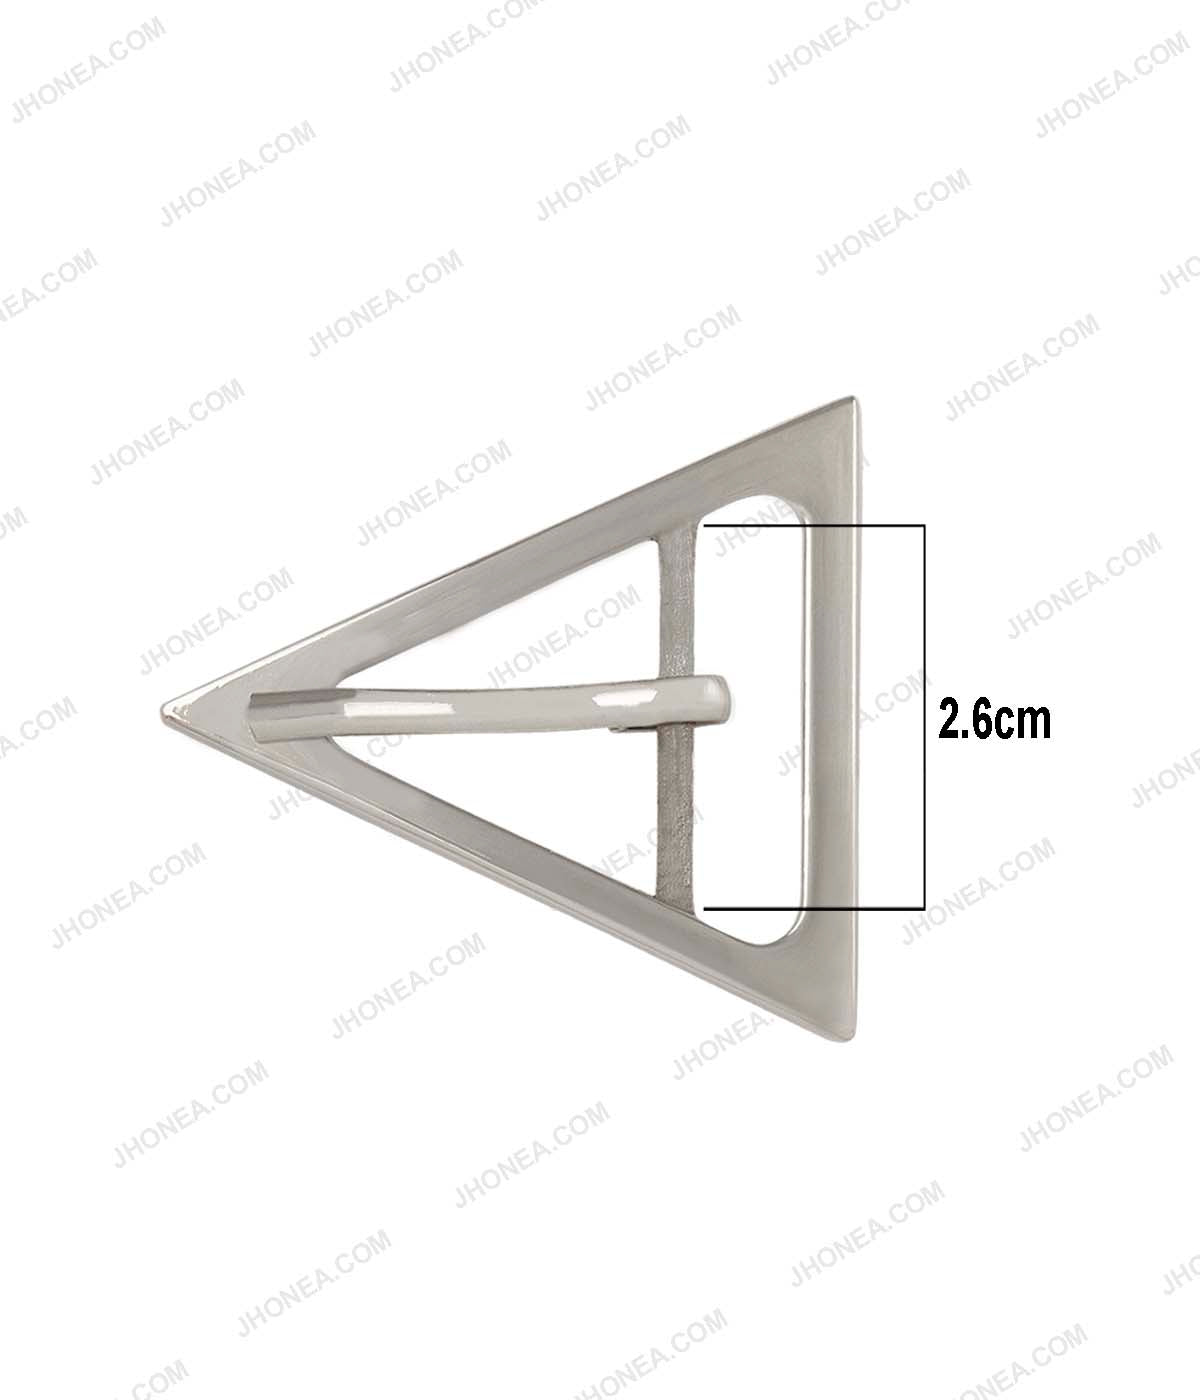 Triangle Geometric Structure Prong Belt Buckle in Shiny Silver Colour for Western Dresses